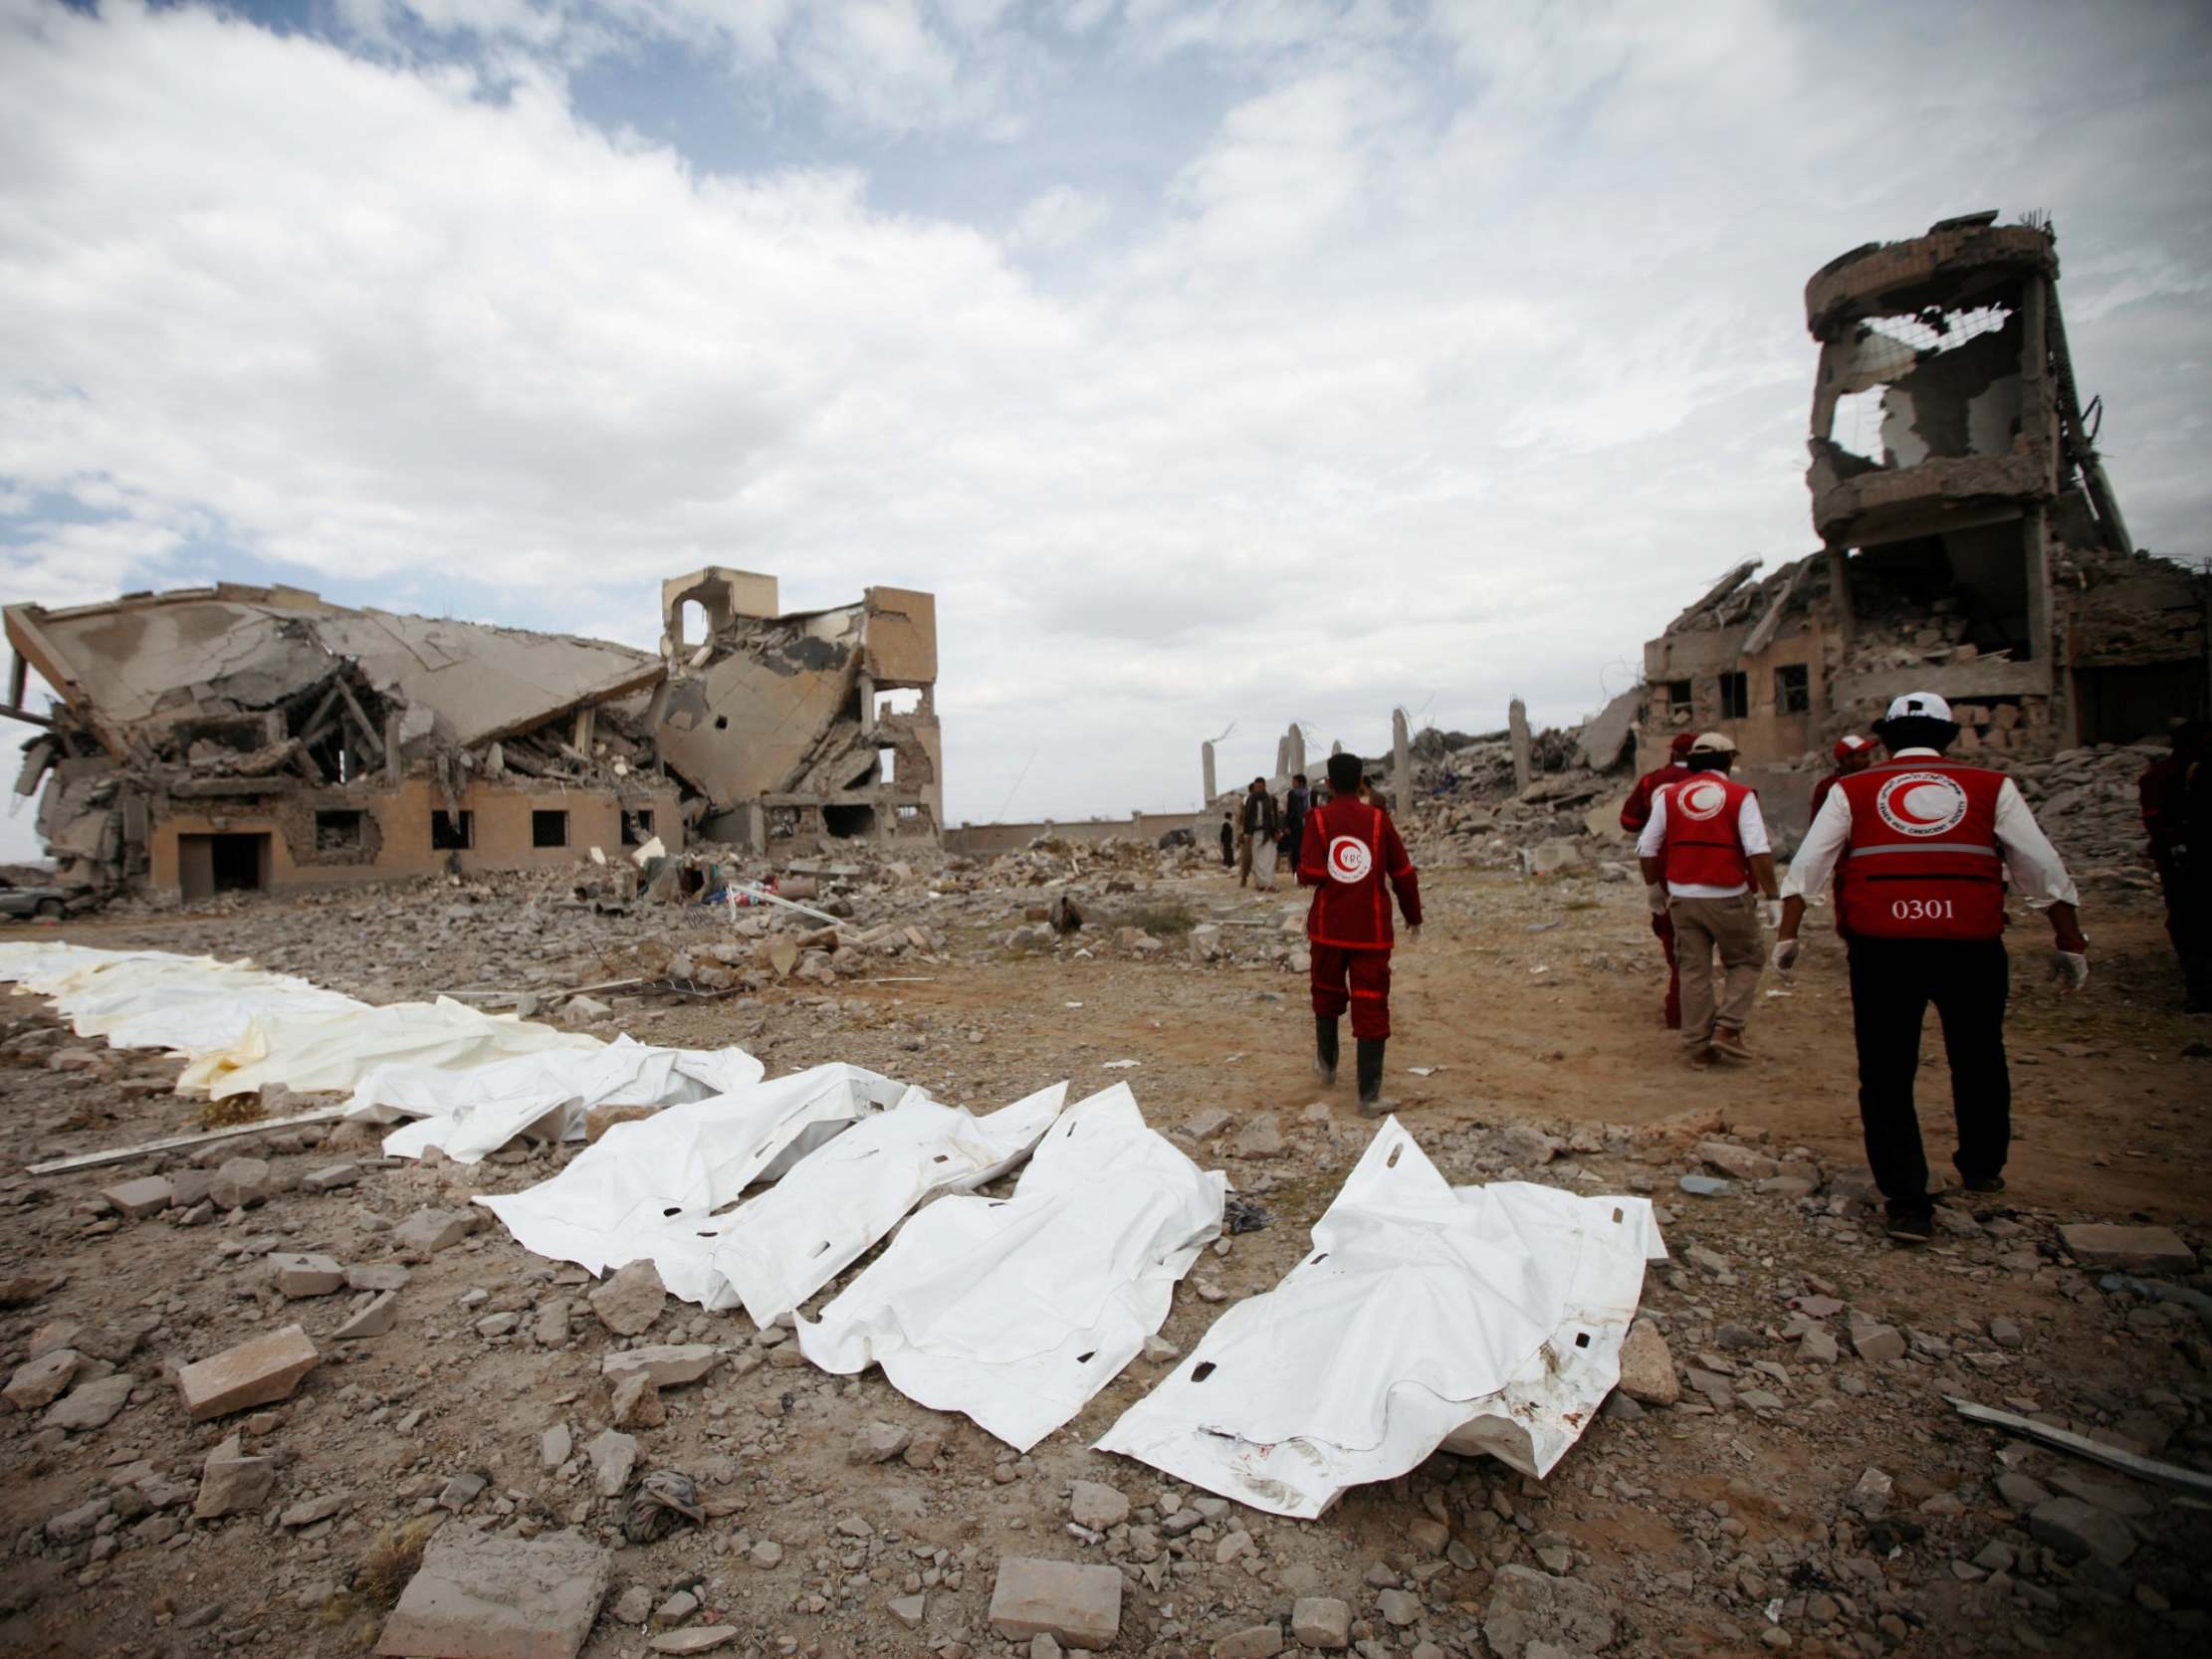 A Saudi-led military coalition attacked multiple sites in Yemen, leaving dozens dead